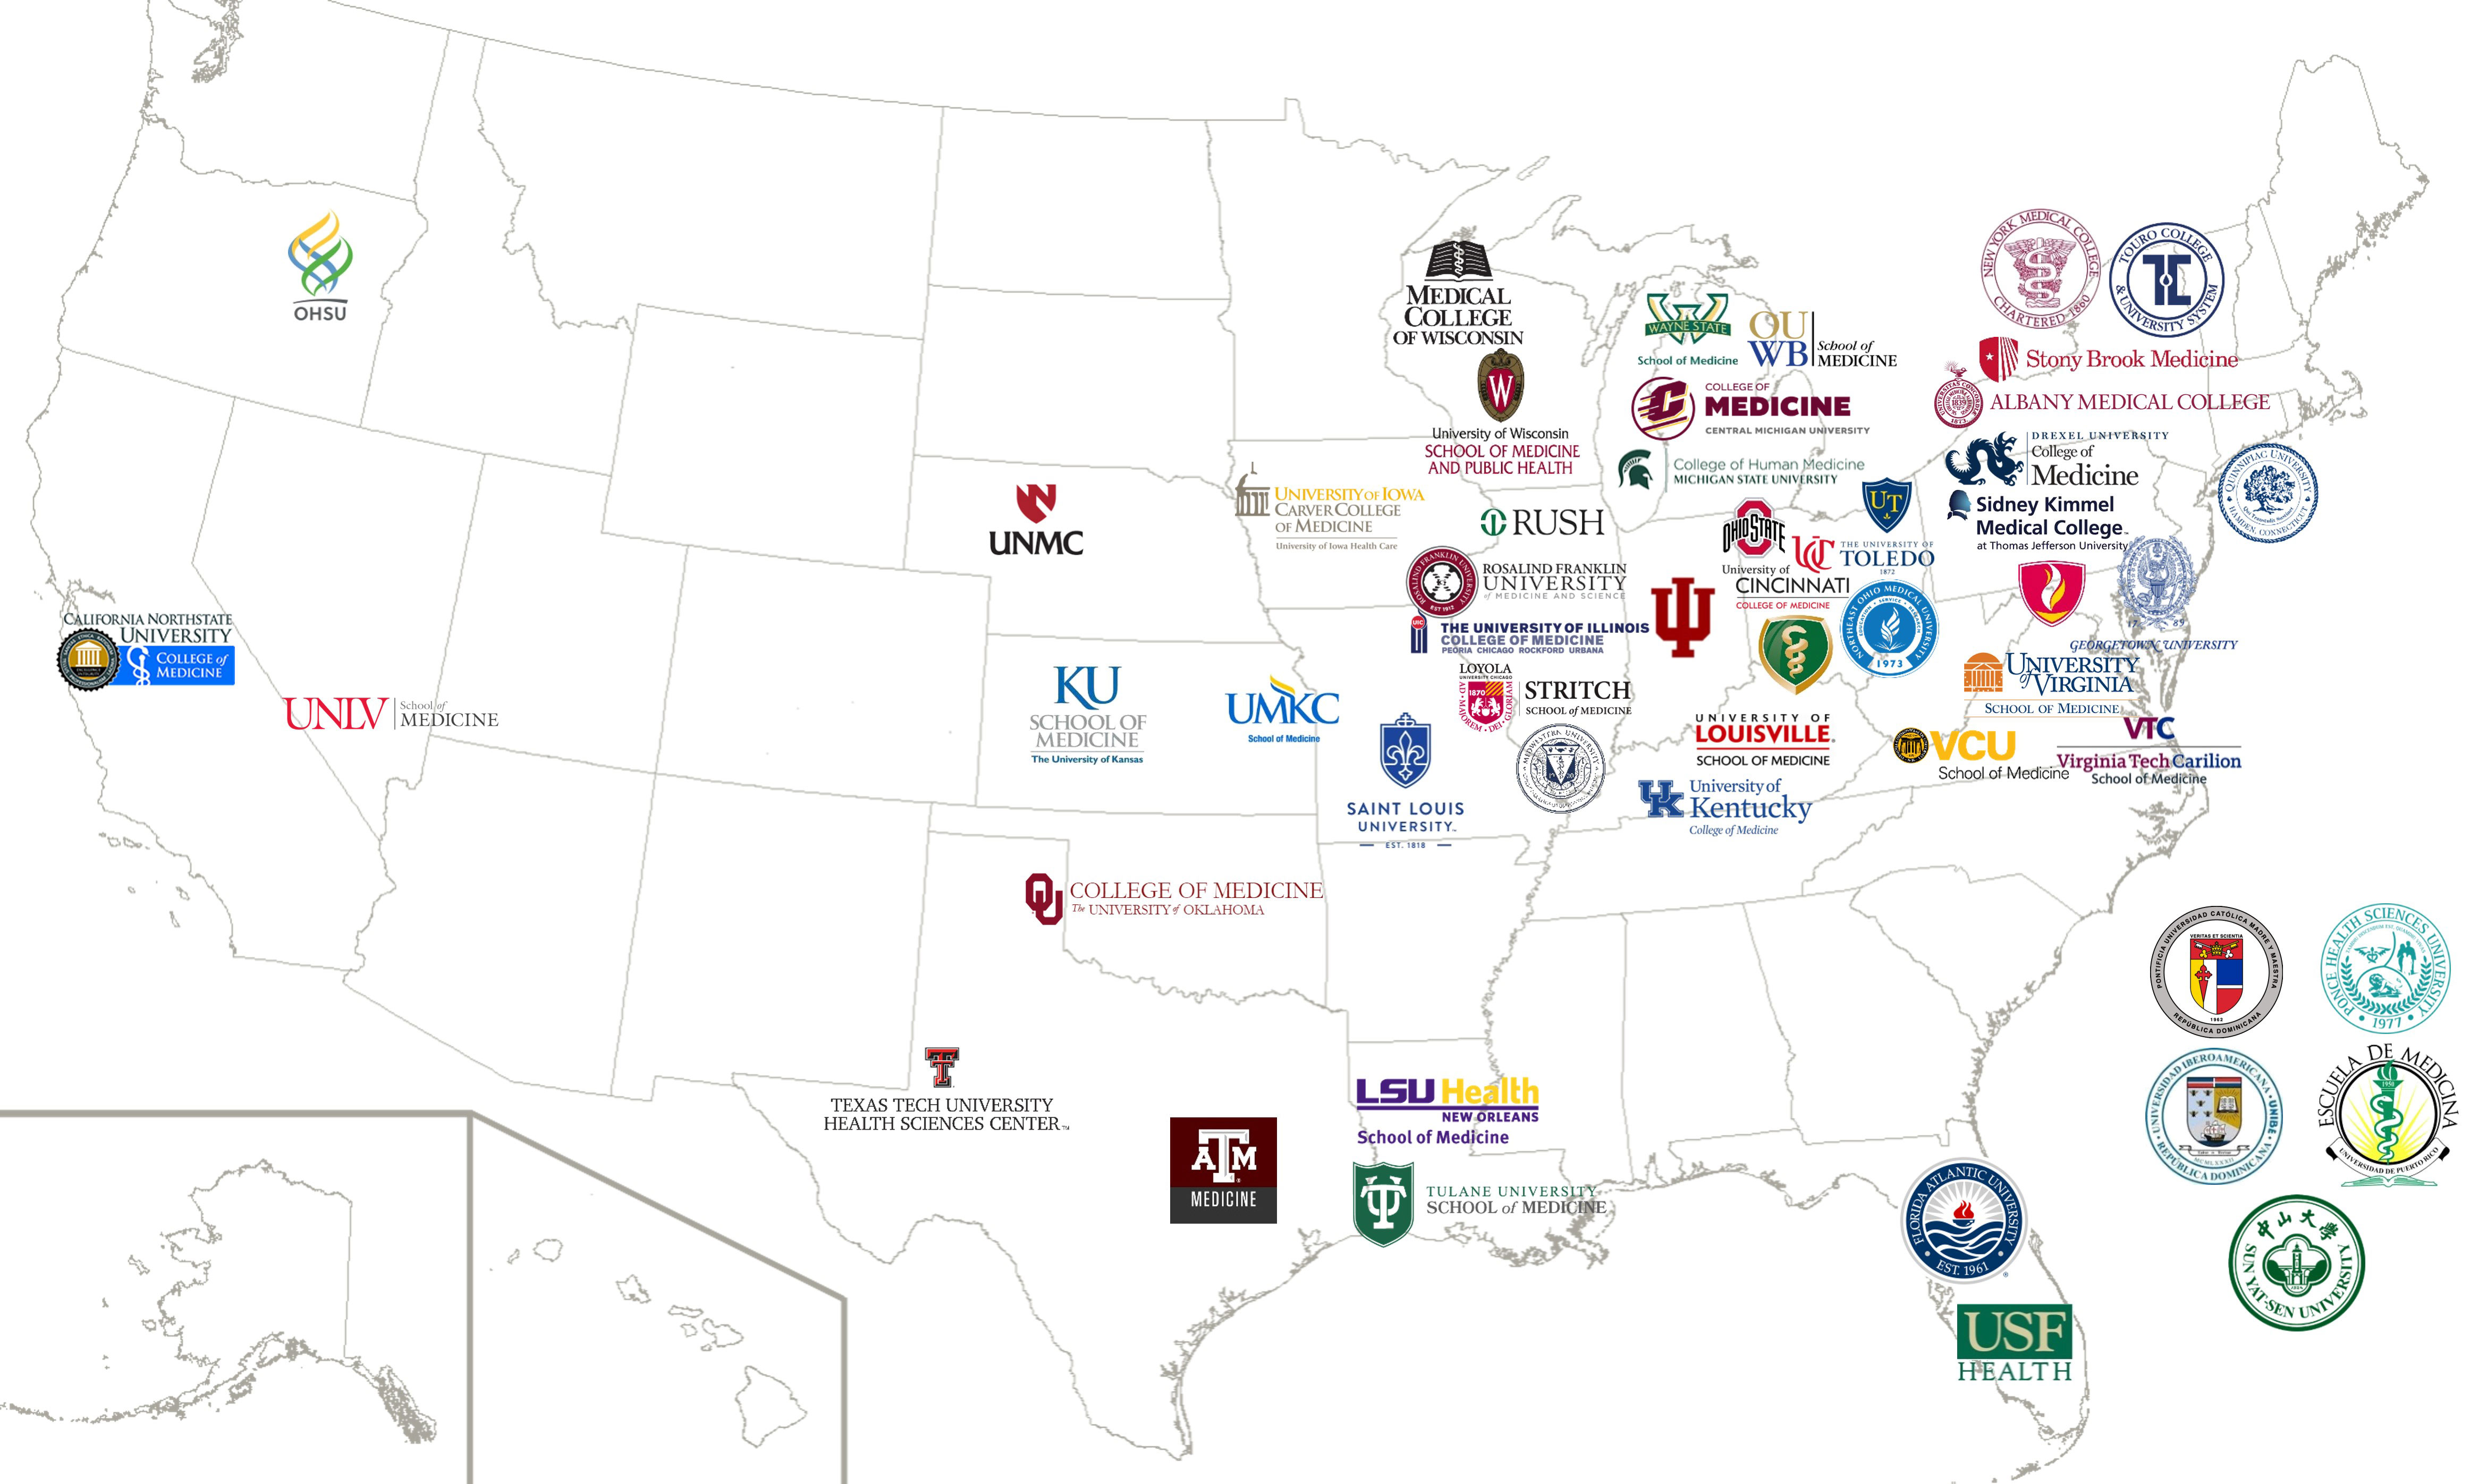 A map of the U.S. showing Universities where residents have come from.